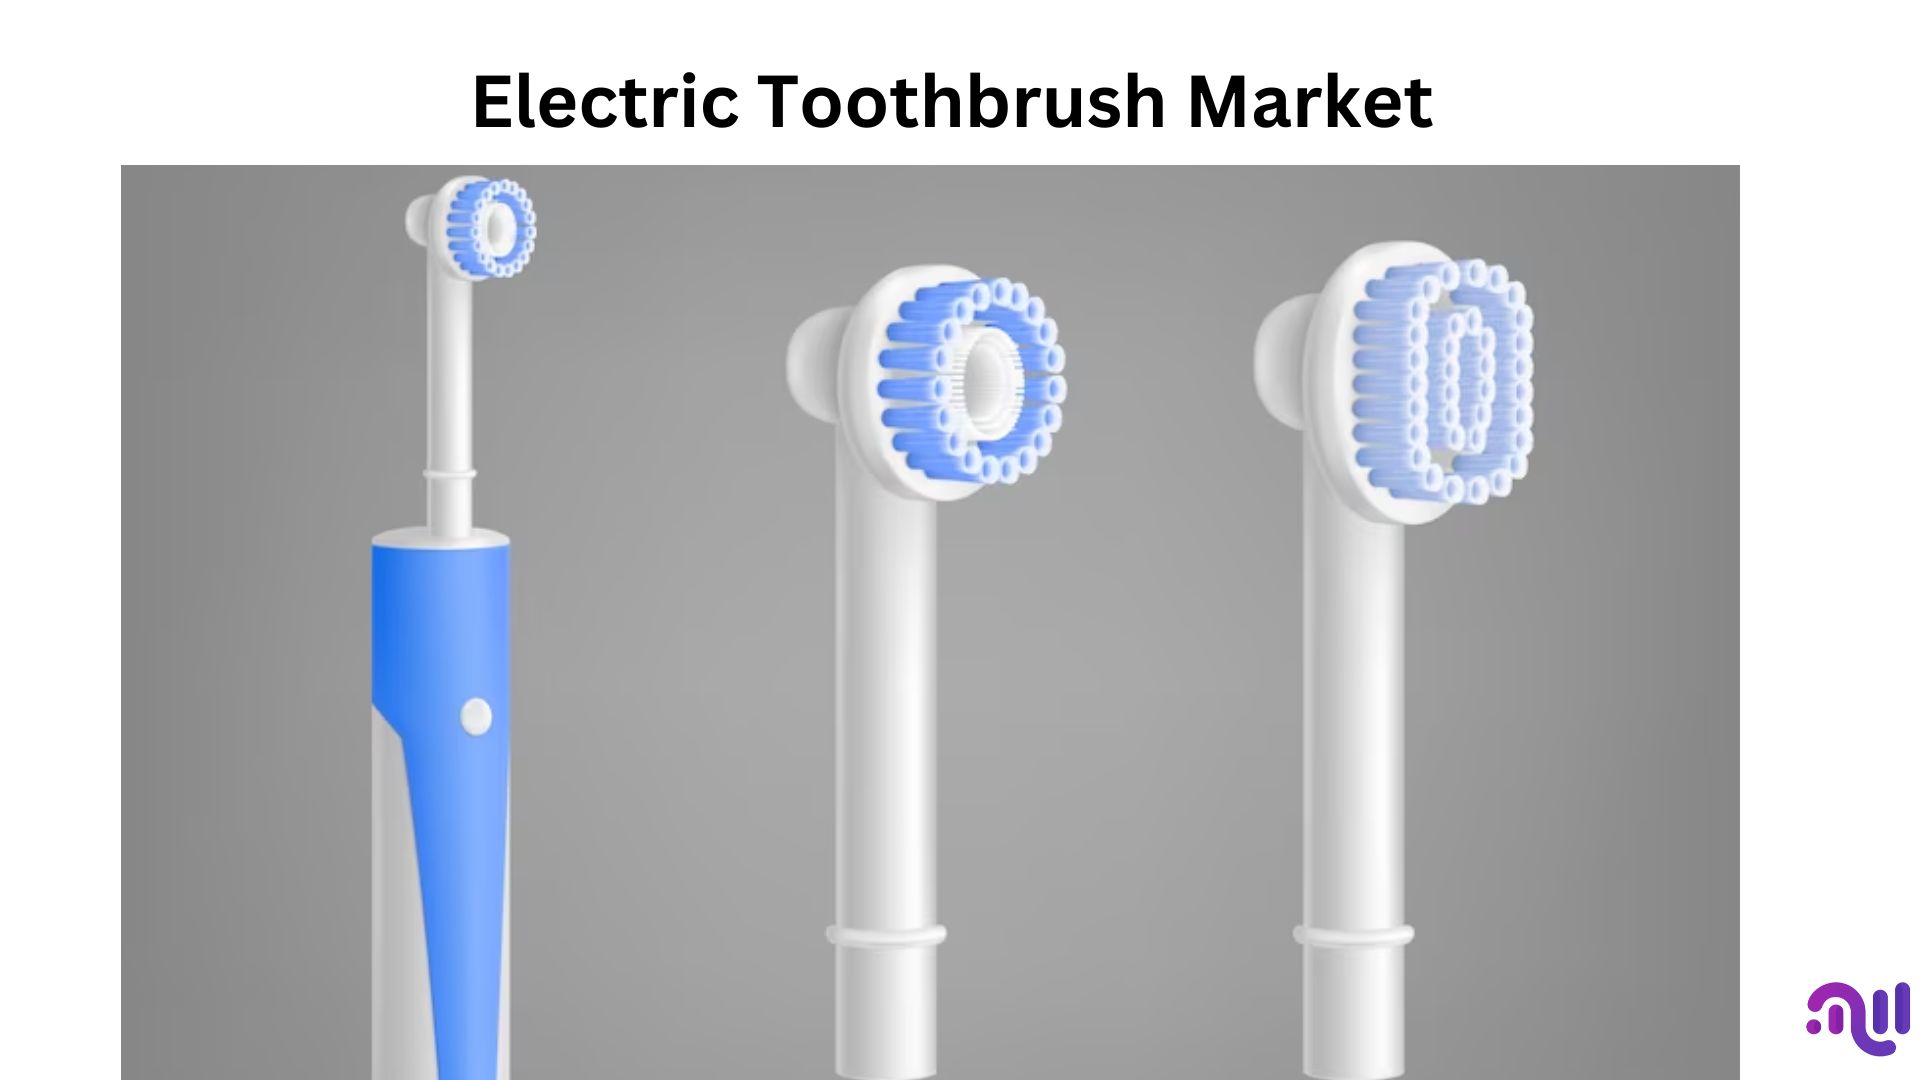 Electric Toothbrush Market Sales Are Expected to Flourish at a CAGR of 8.20%